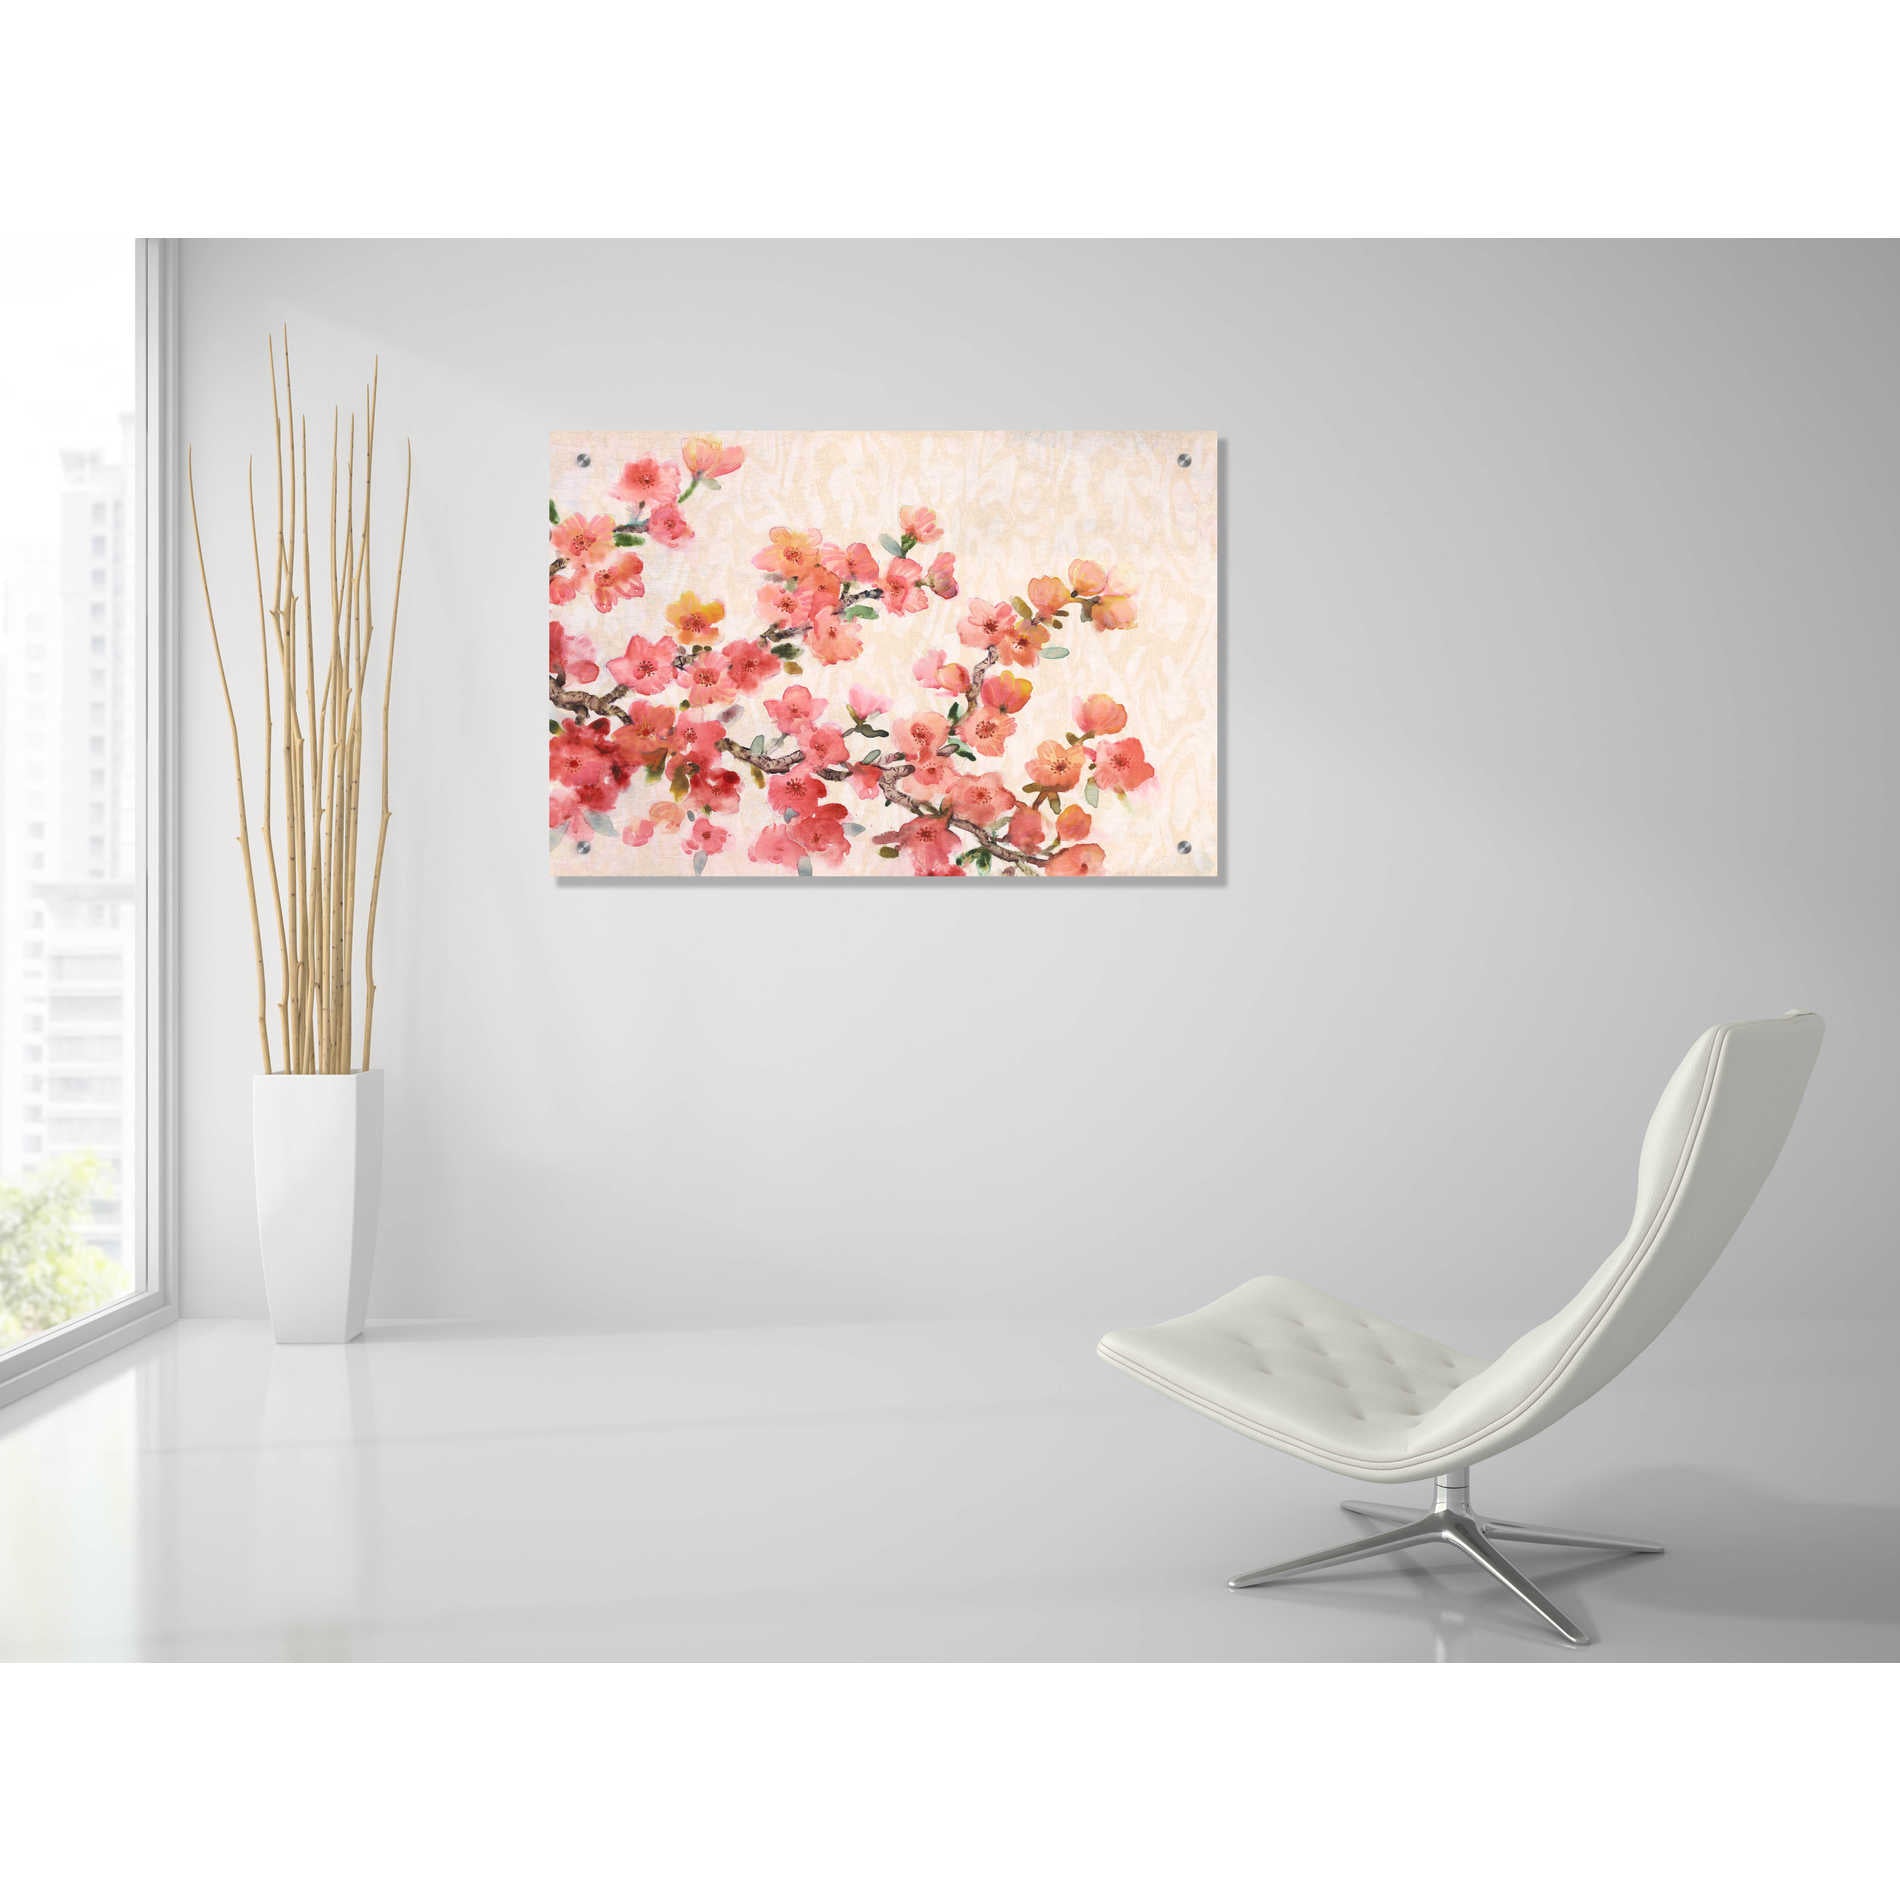 Epic Art 'Cherry Blossom Composition II' by Tim O'Toole, Acrylic Glass Wall Art,36x24